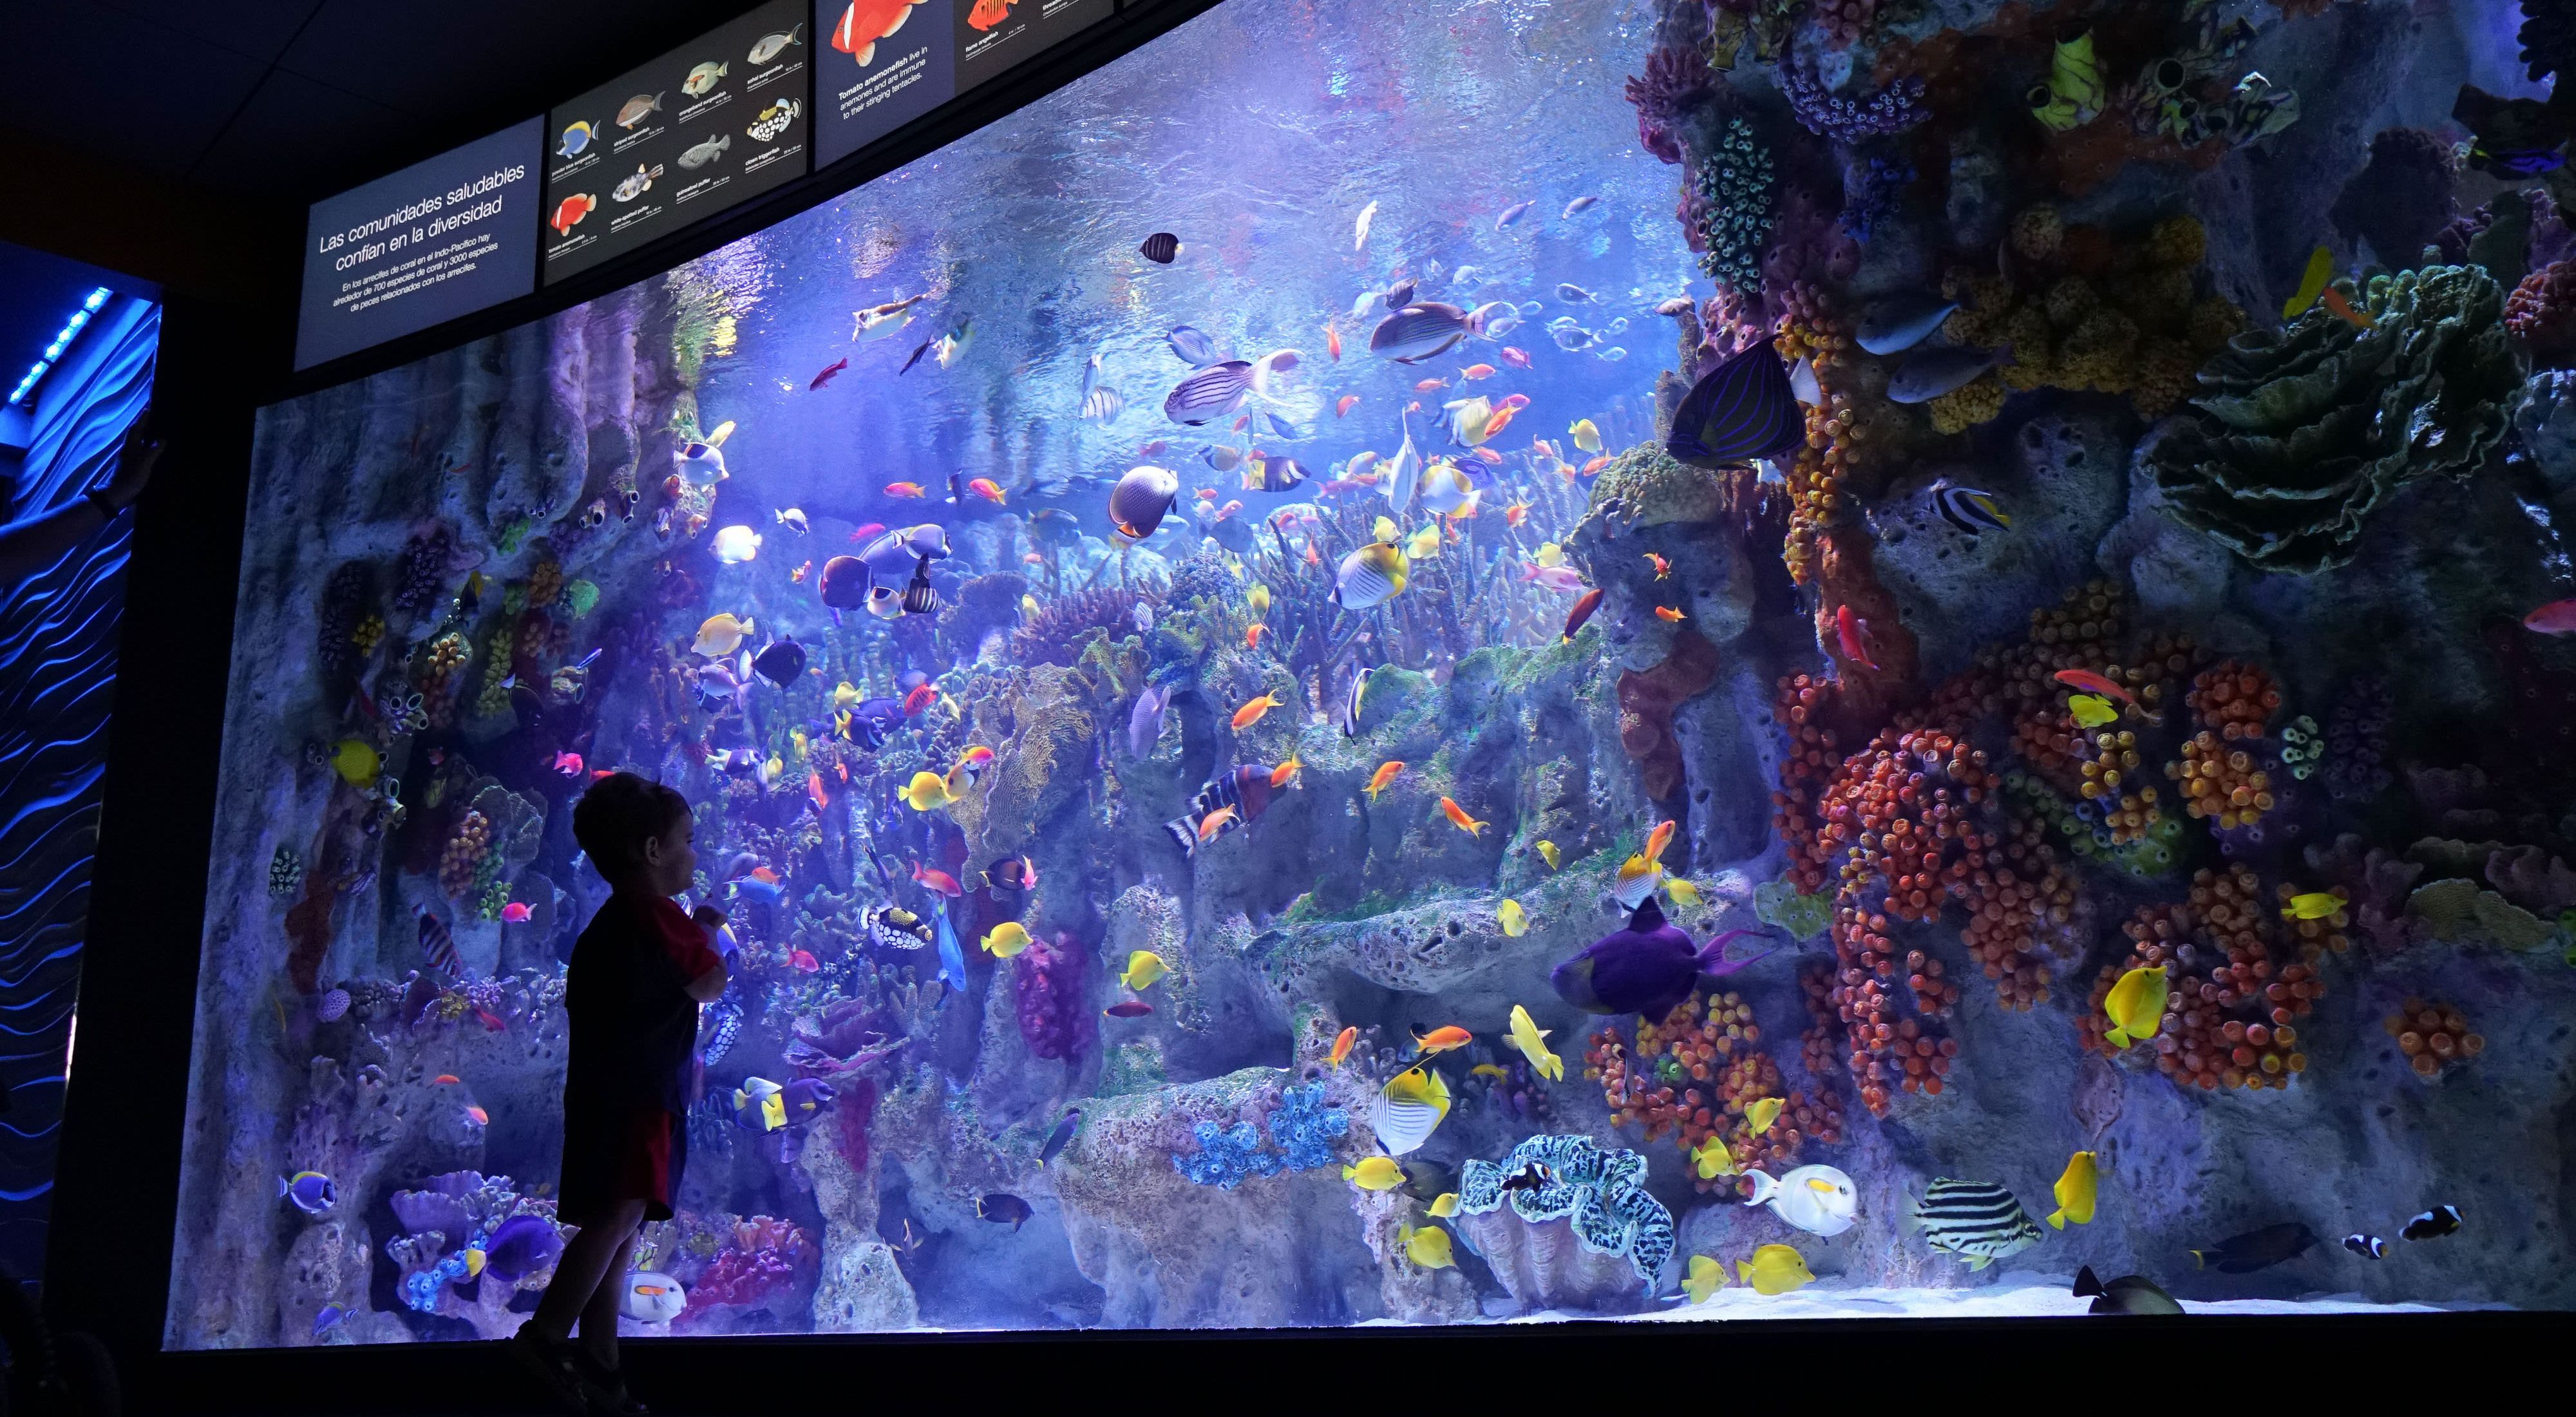 Silhouette of a child in front of a large aquarium fish tank filled with colorful fish and corals.